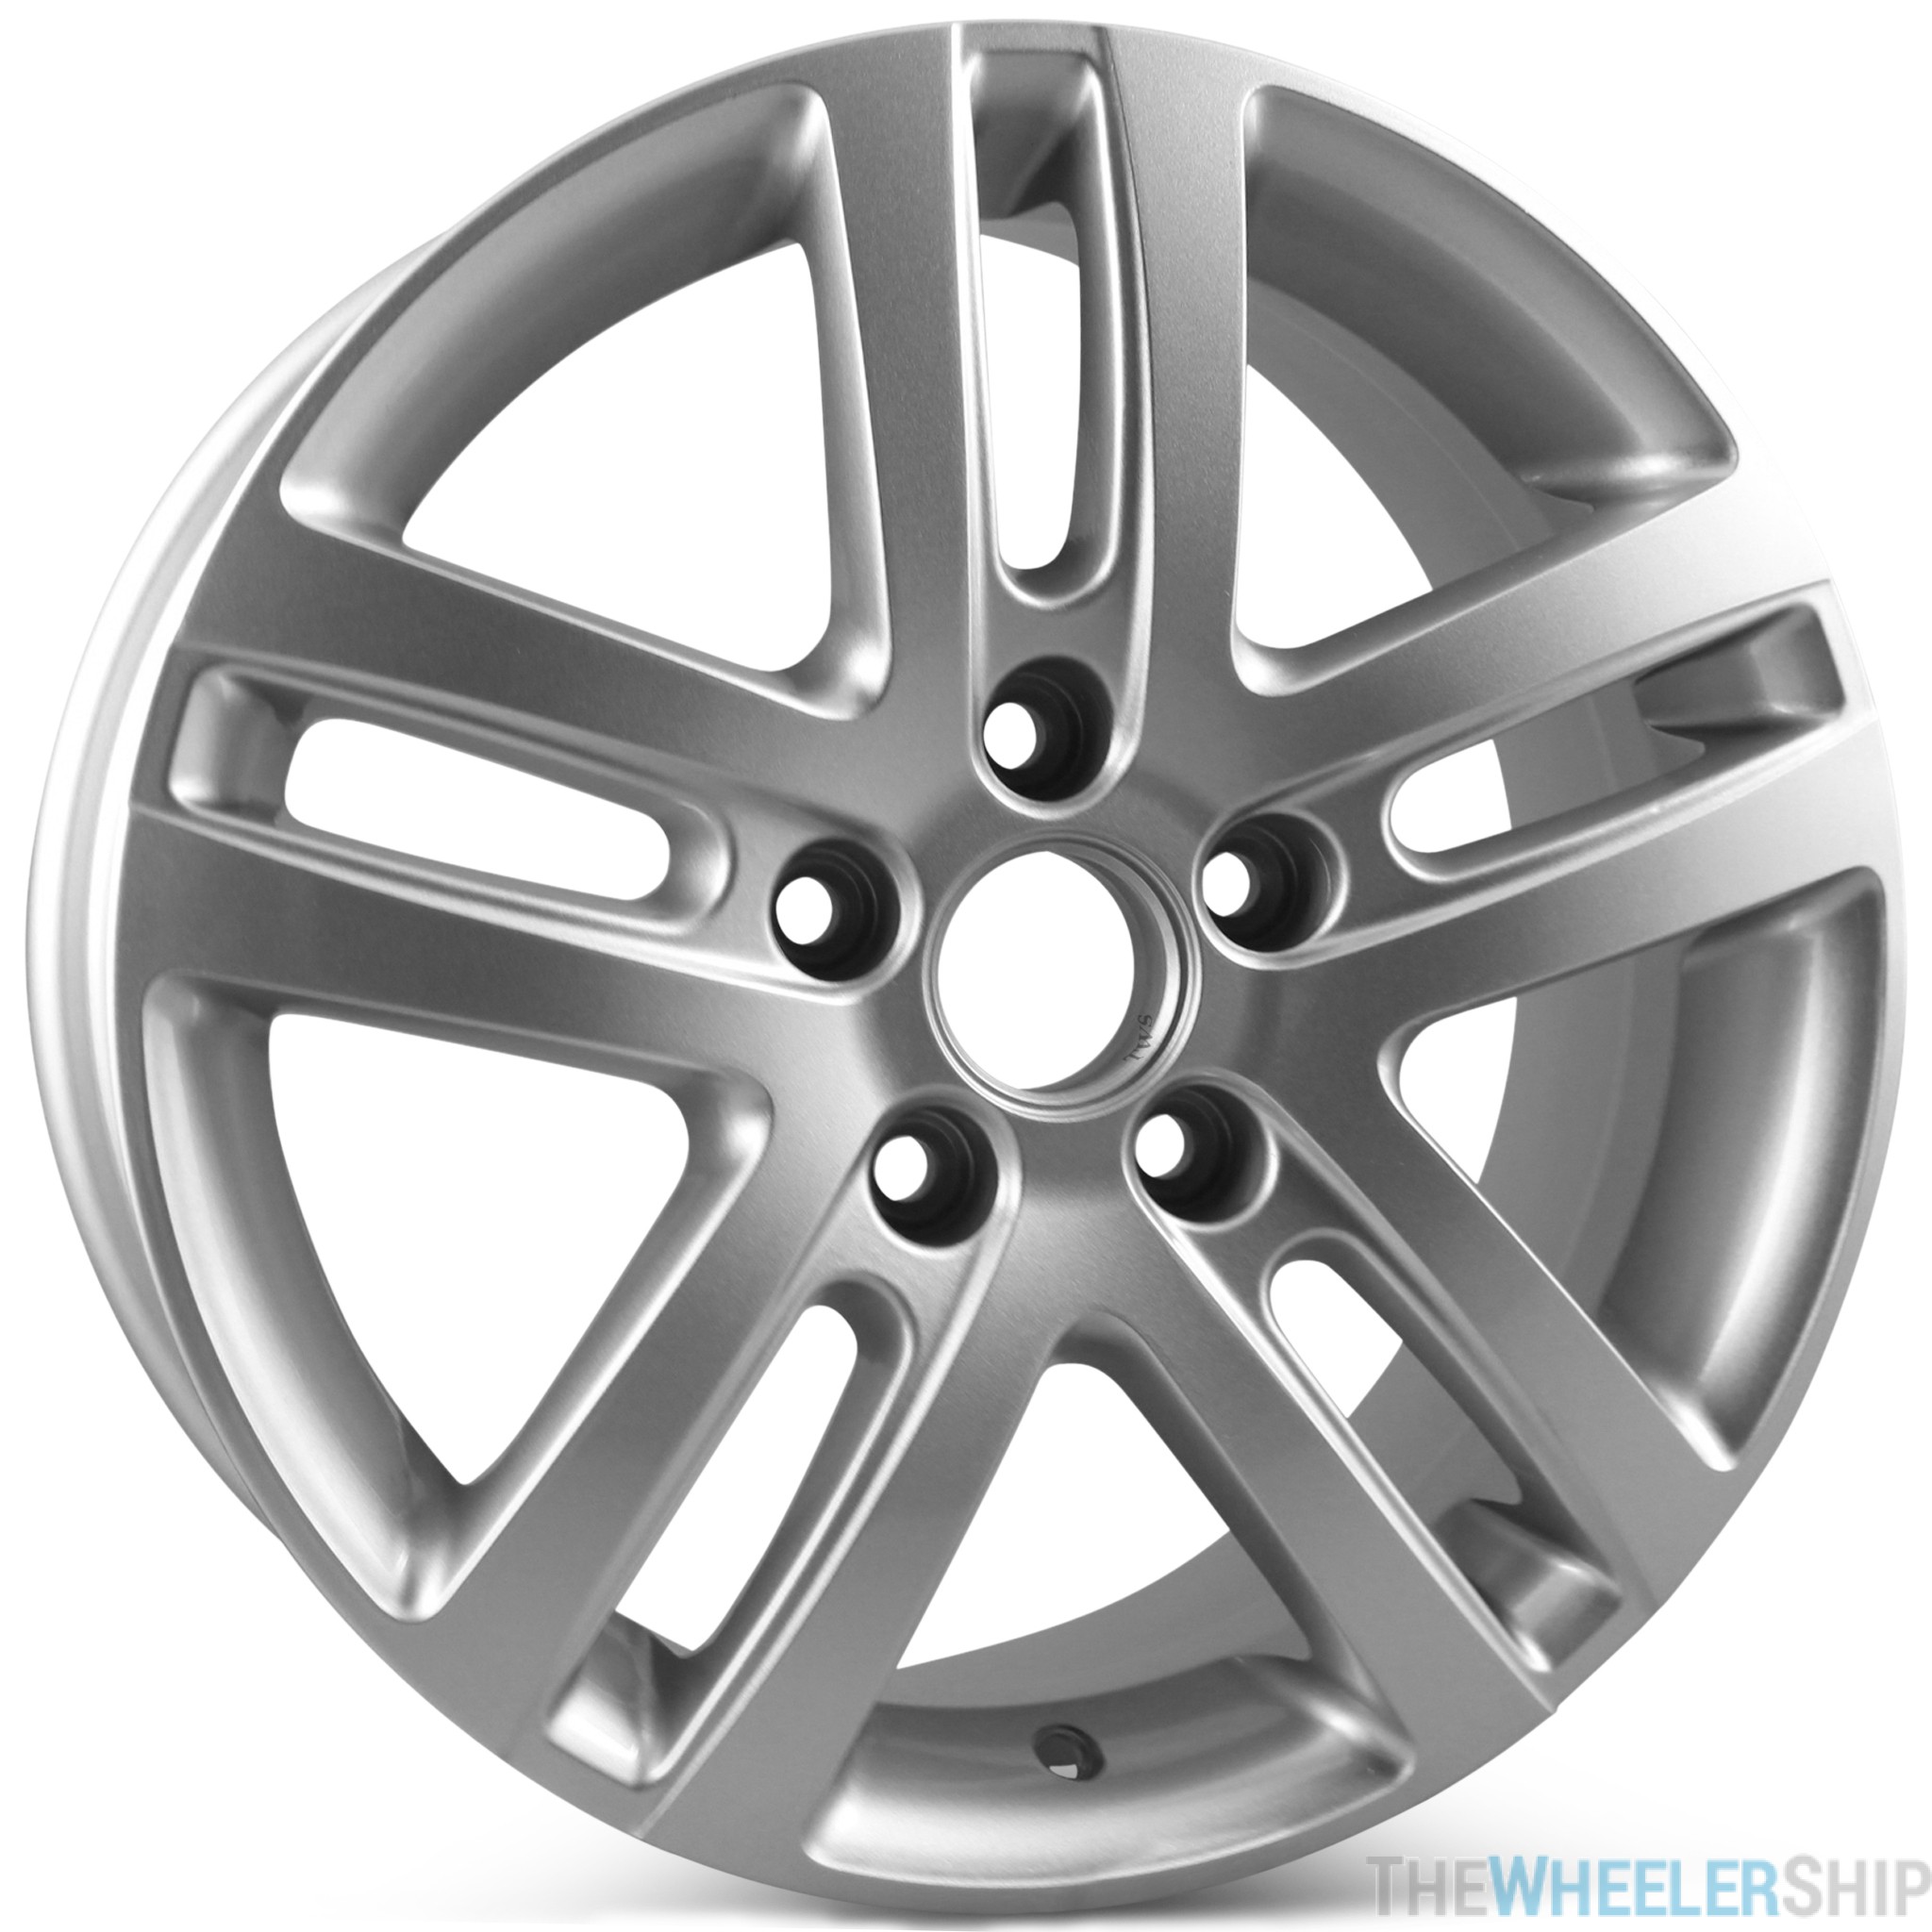 16" Alloy Replacement Wheel for Volkswagen Jetta VW 2005-2015 Silver Rim 69812 Open Box What Size Tires Are On A 2015 Volkswagen Jetta